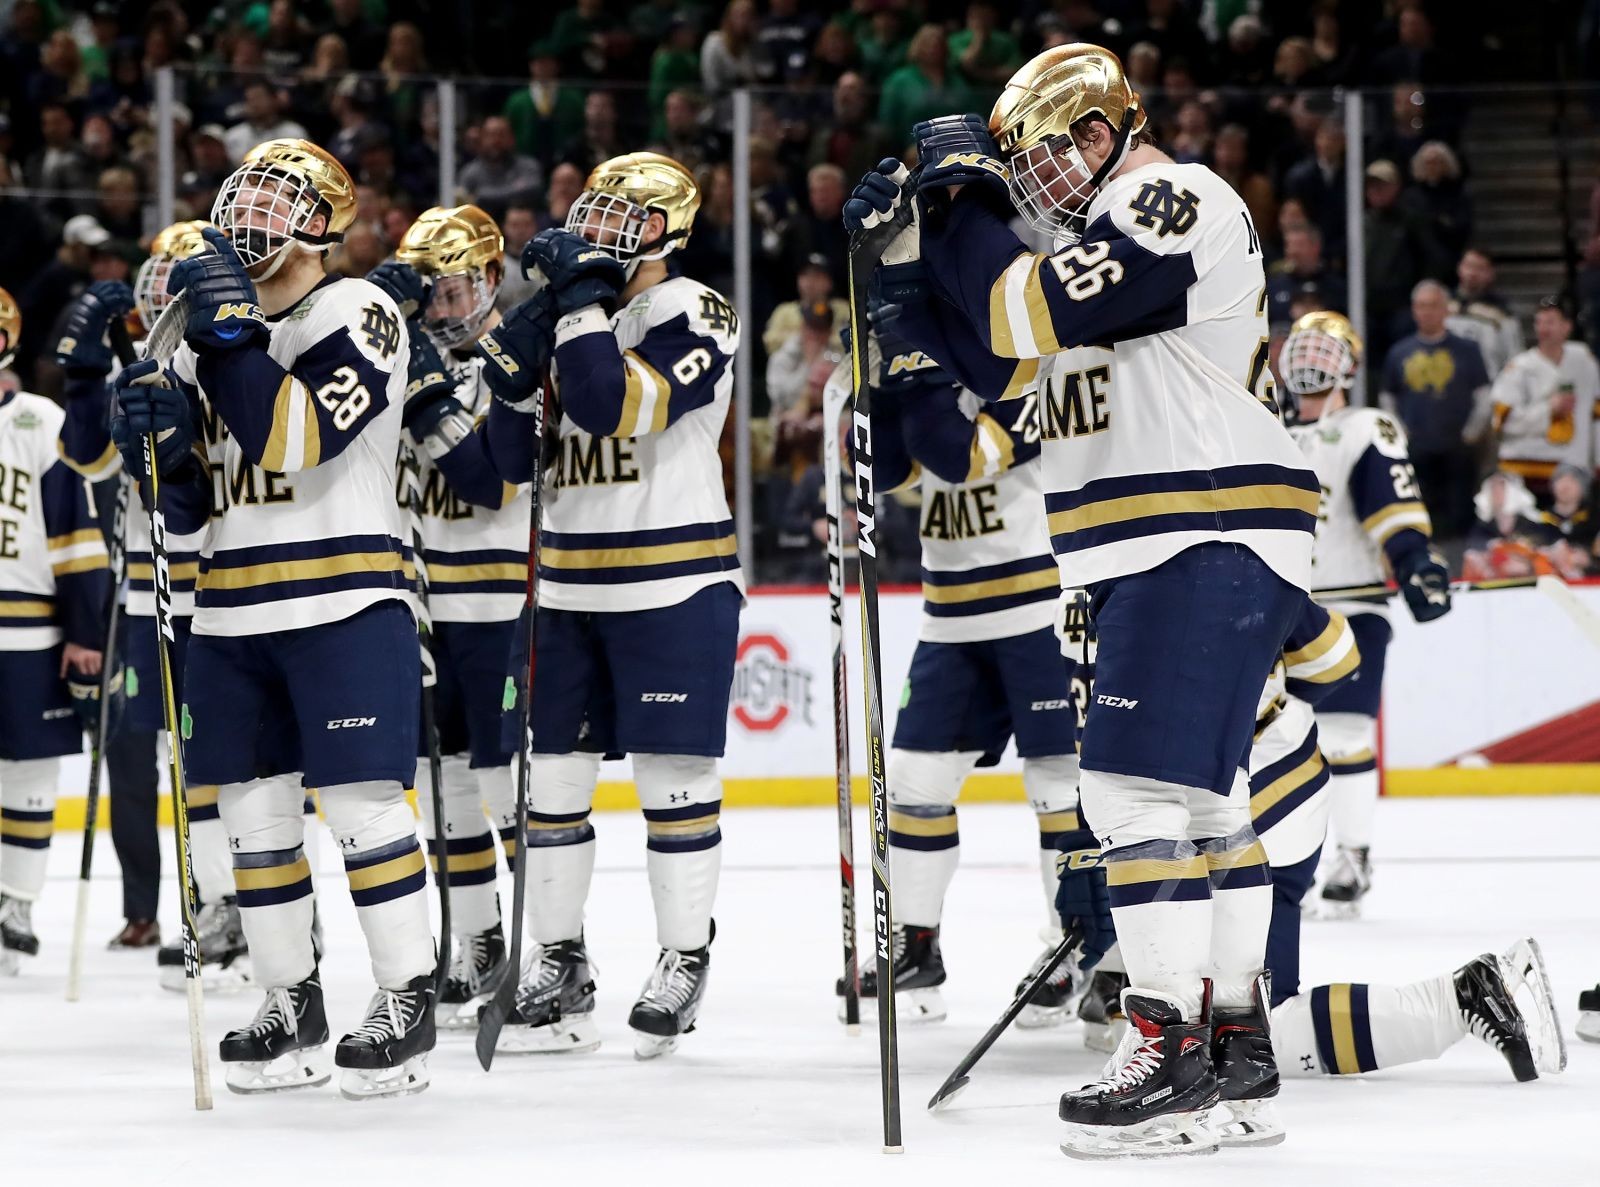 Notre Dame Hockey in Danger of Missing NCAA Tournament